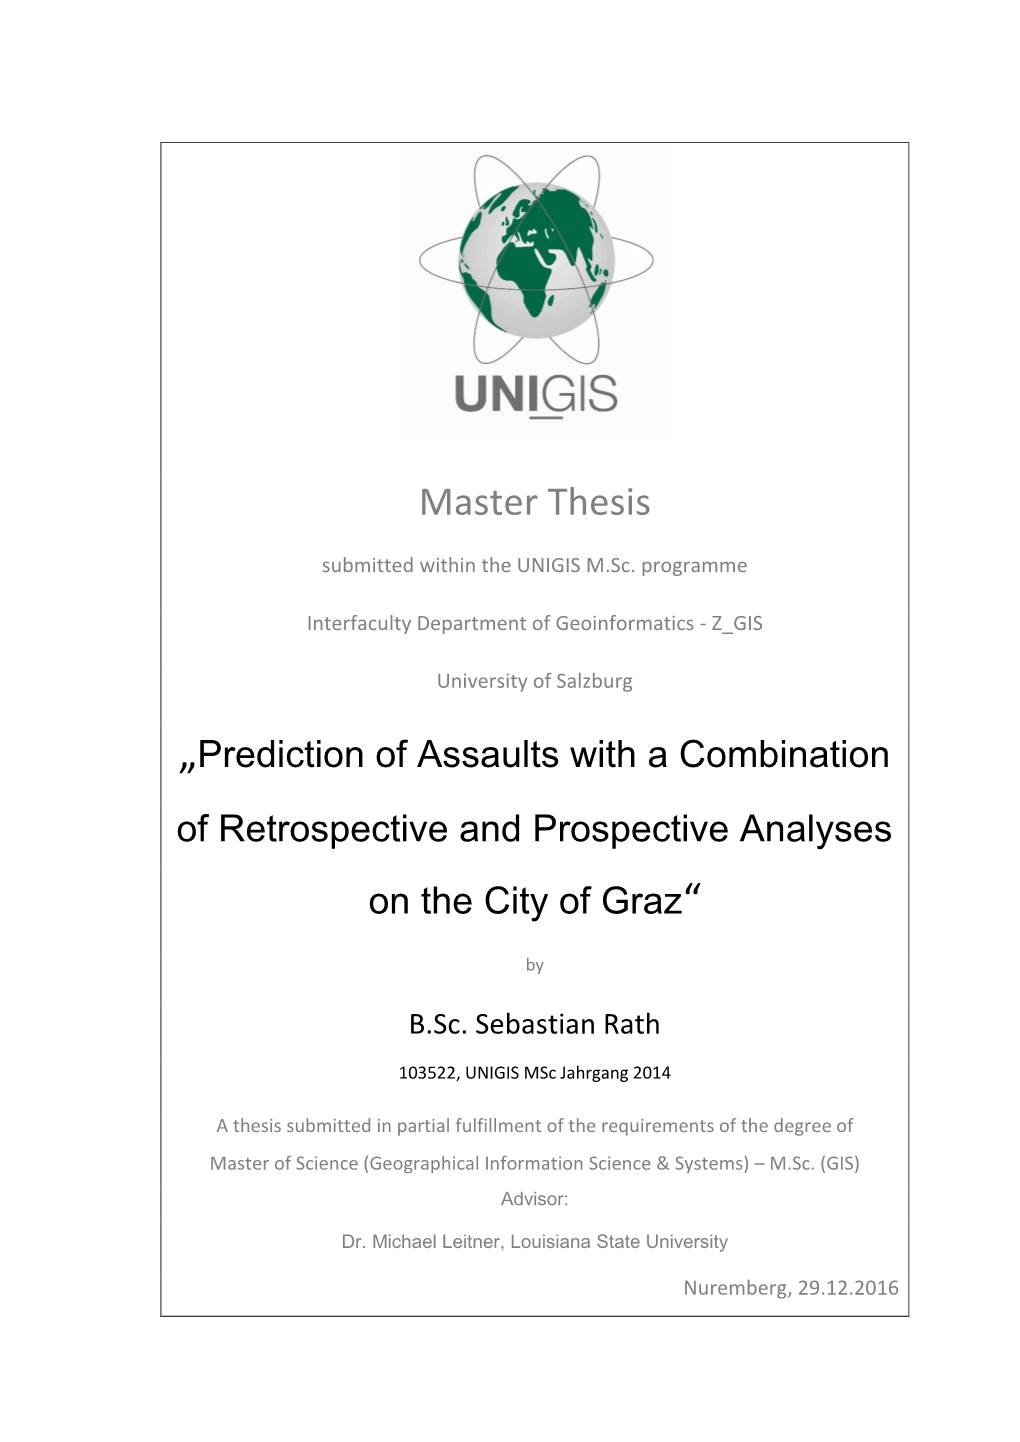 Prediction of Assaults with a Combination of Retrospective and Prospective Analyses on the City of Graz“